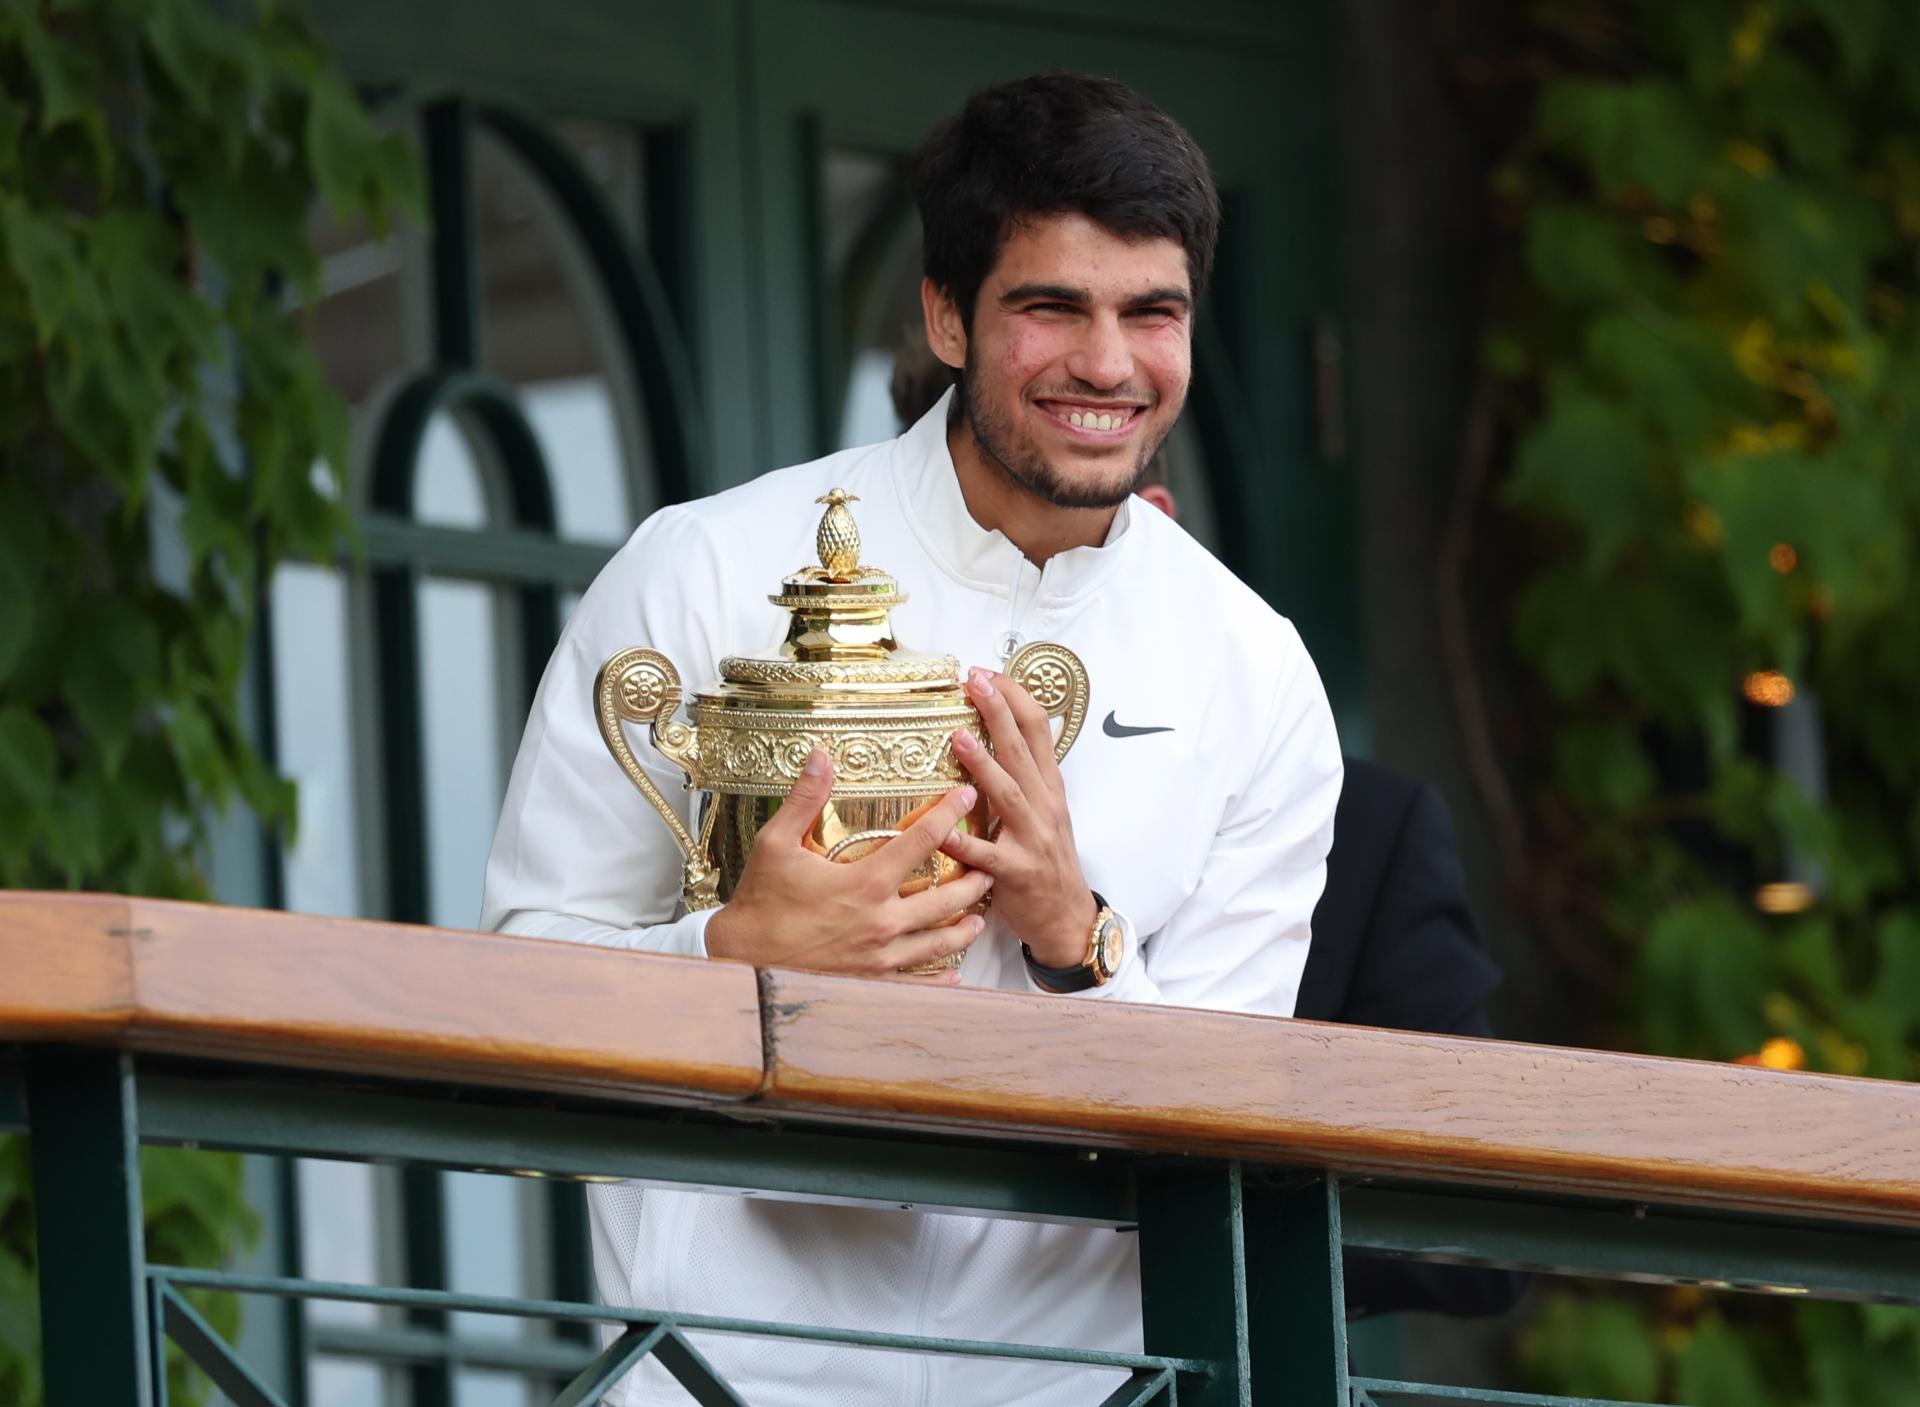 Spanish world No. 1 Carlos Alcaraz holds the Wimbledon trophy he captured by defeating Serbian great Novak Djokovic in the final on 16 July 2023. EFE/EPA/ISABEL INFANTES